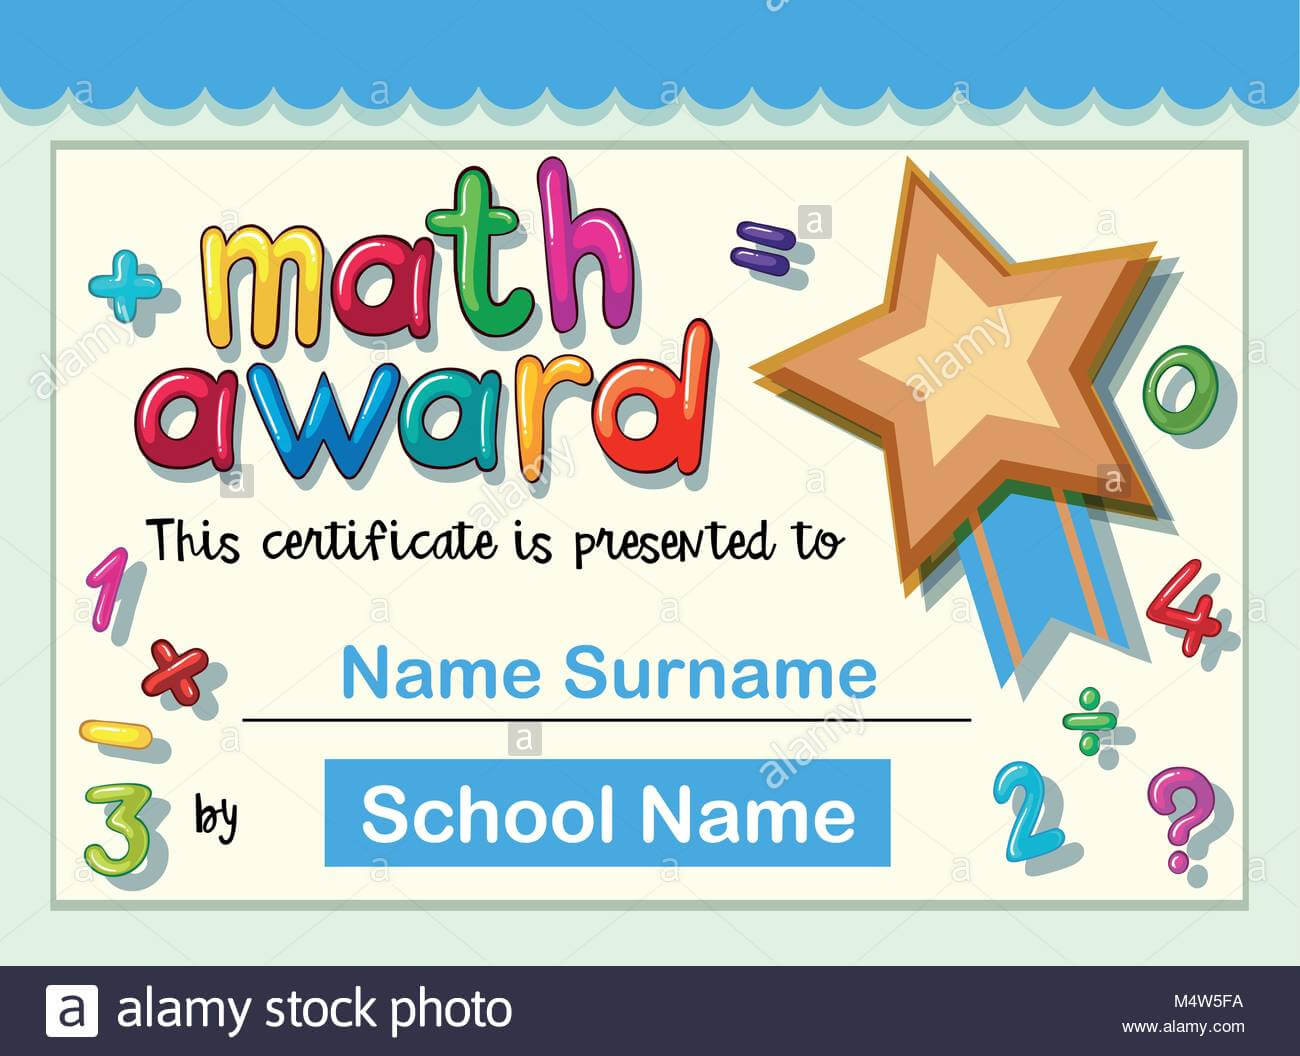 Certificate Template For Math Award With Golden Star Regarding Star Award Certificate Template